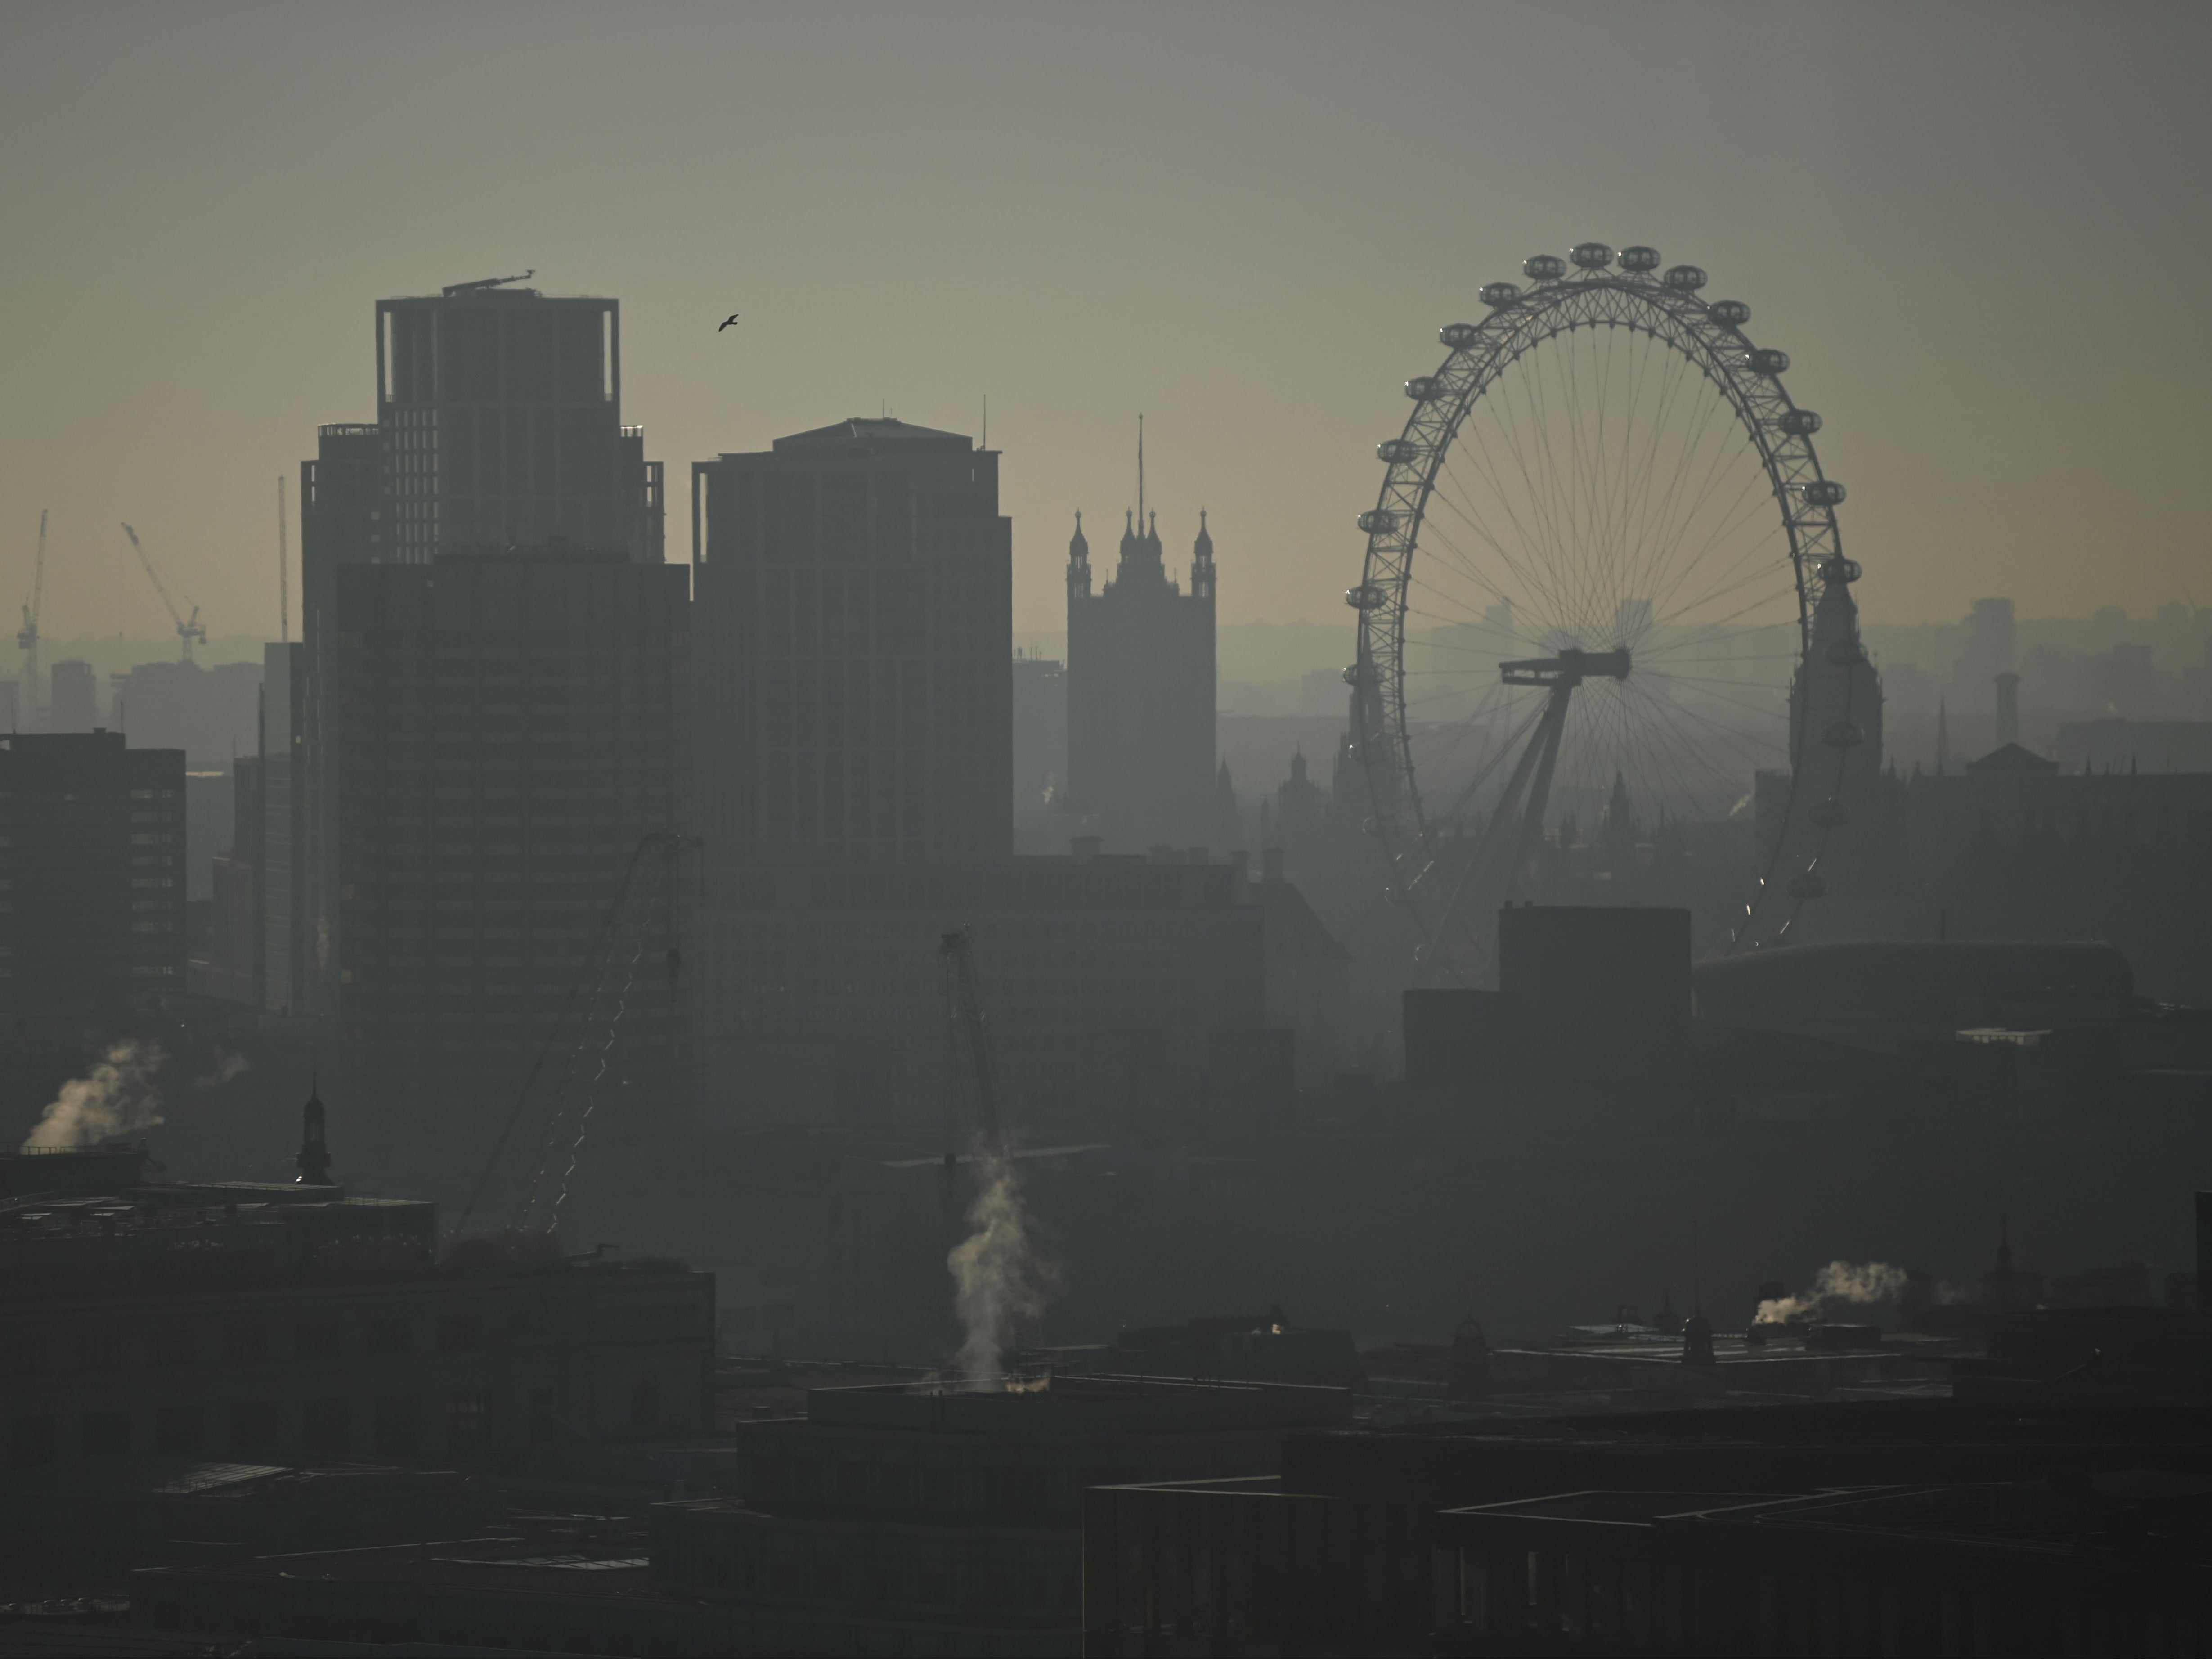 Hundreds were hospitalised due to air pollution between 2017 and 2019 in the capital, new research finds